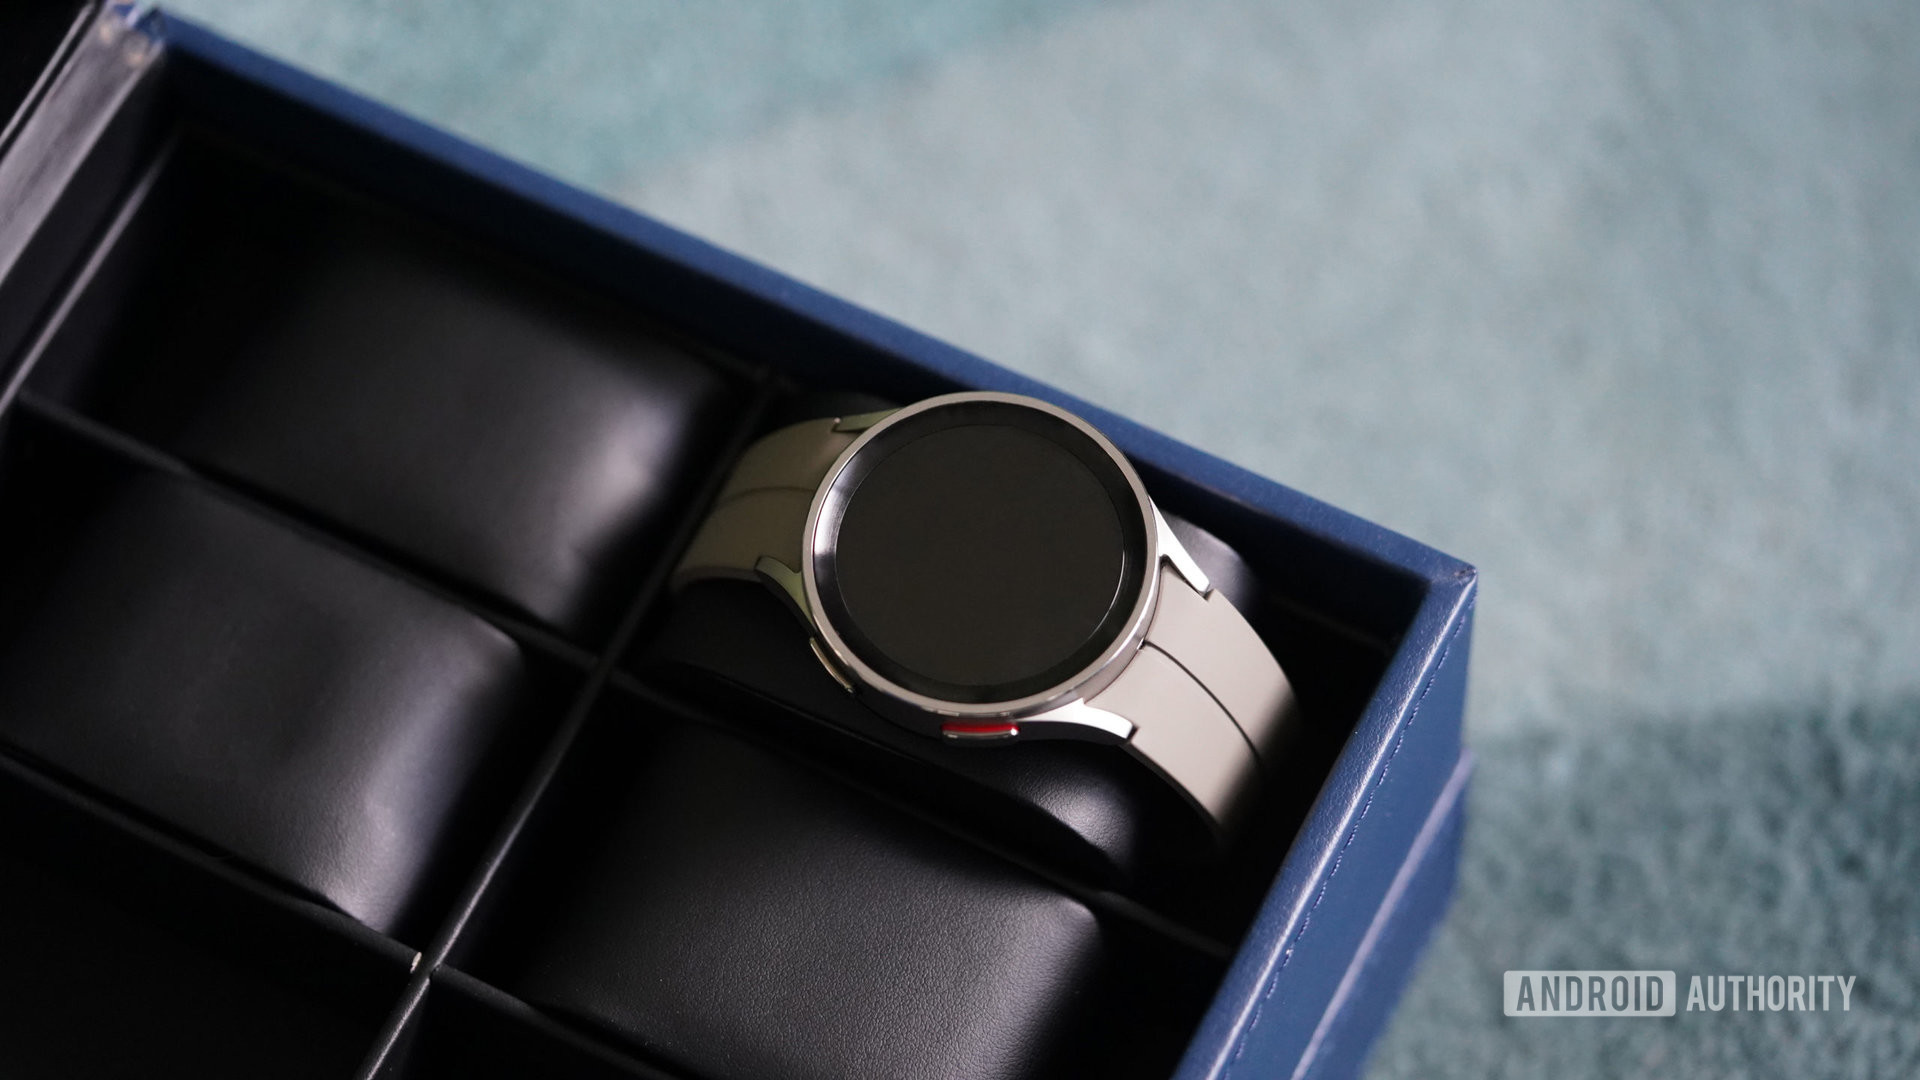 A watch box stores a Galaxy Watch 5 Pro, a wearable line we hope to see upgraded in 2023.